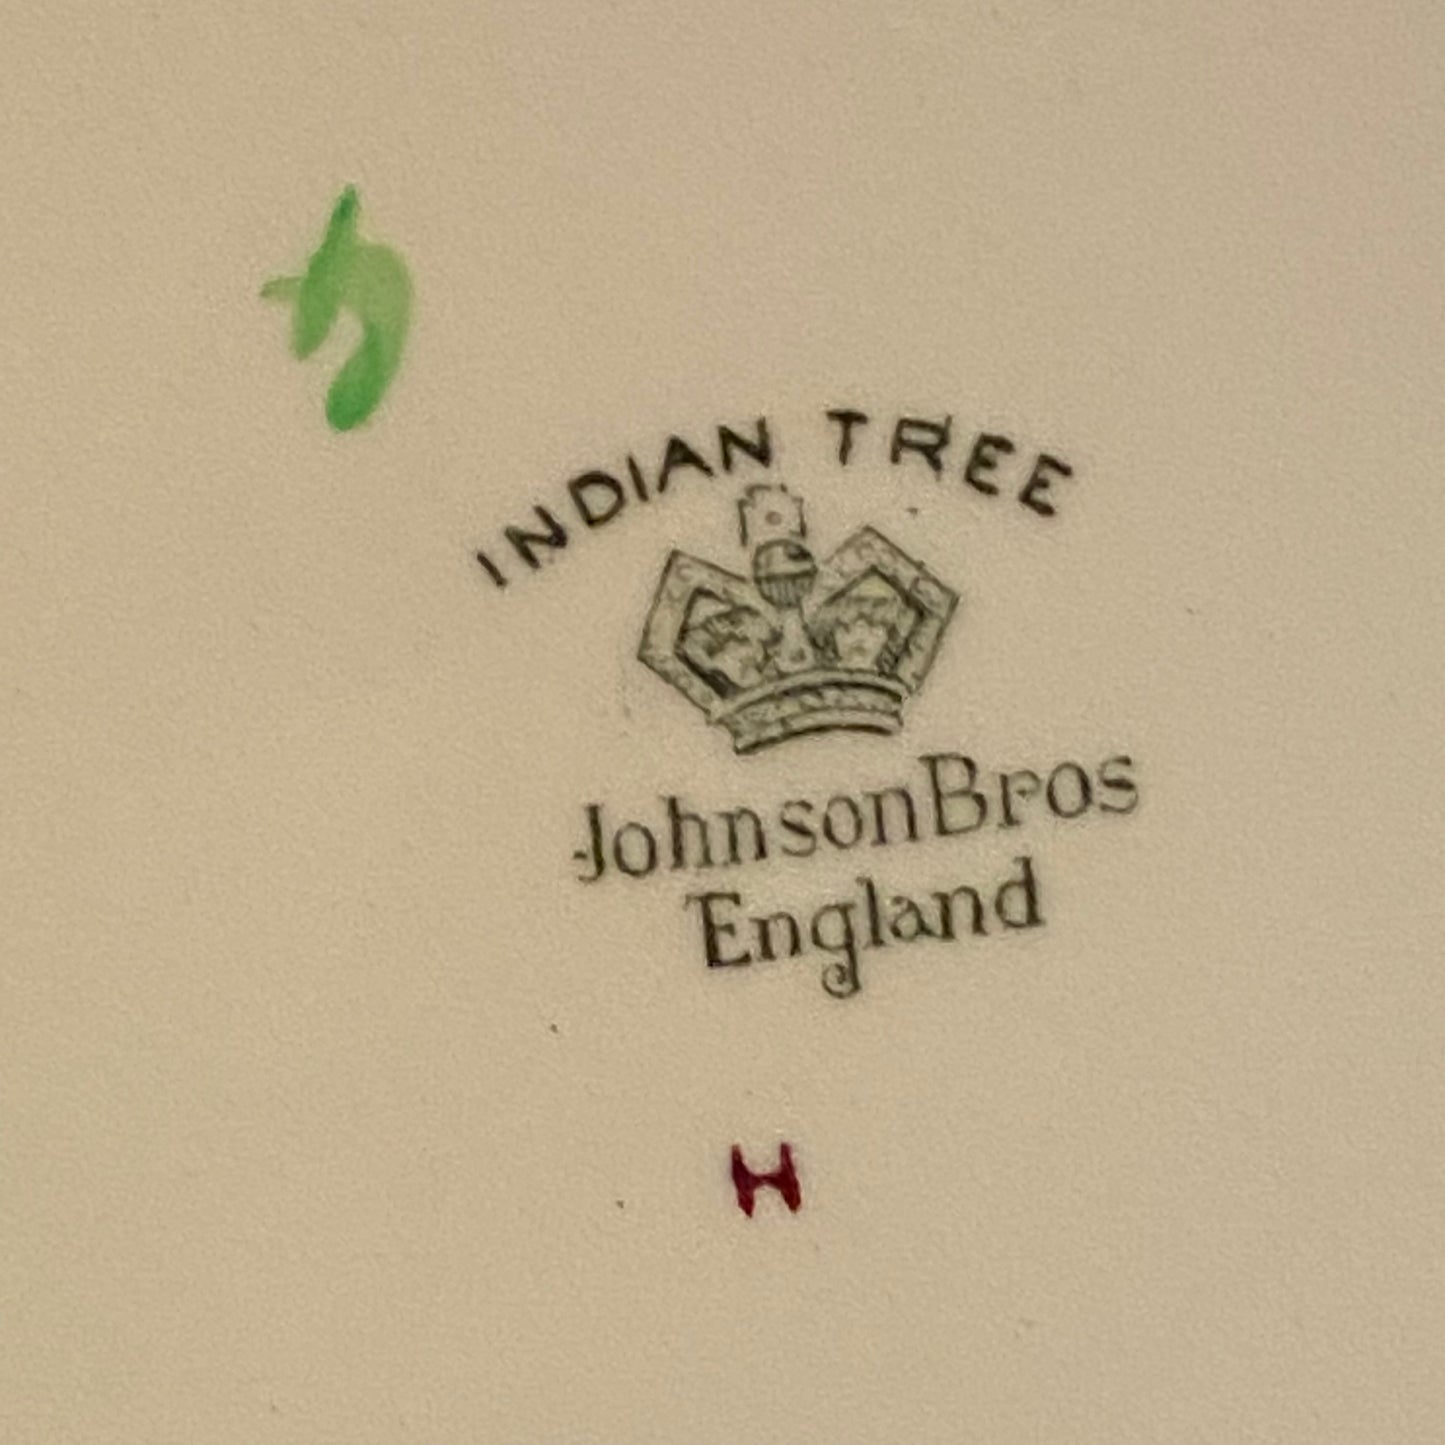 Beautiful Indian Tree by Johnson Brothers of England dinner plate